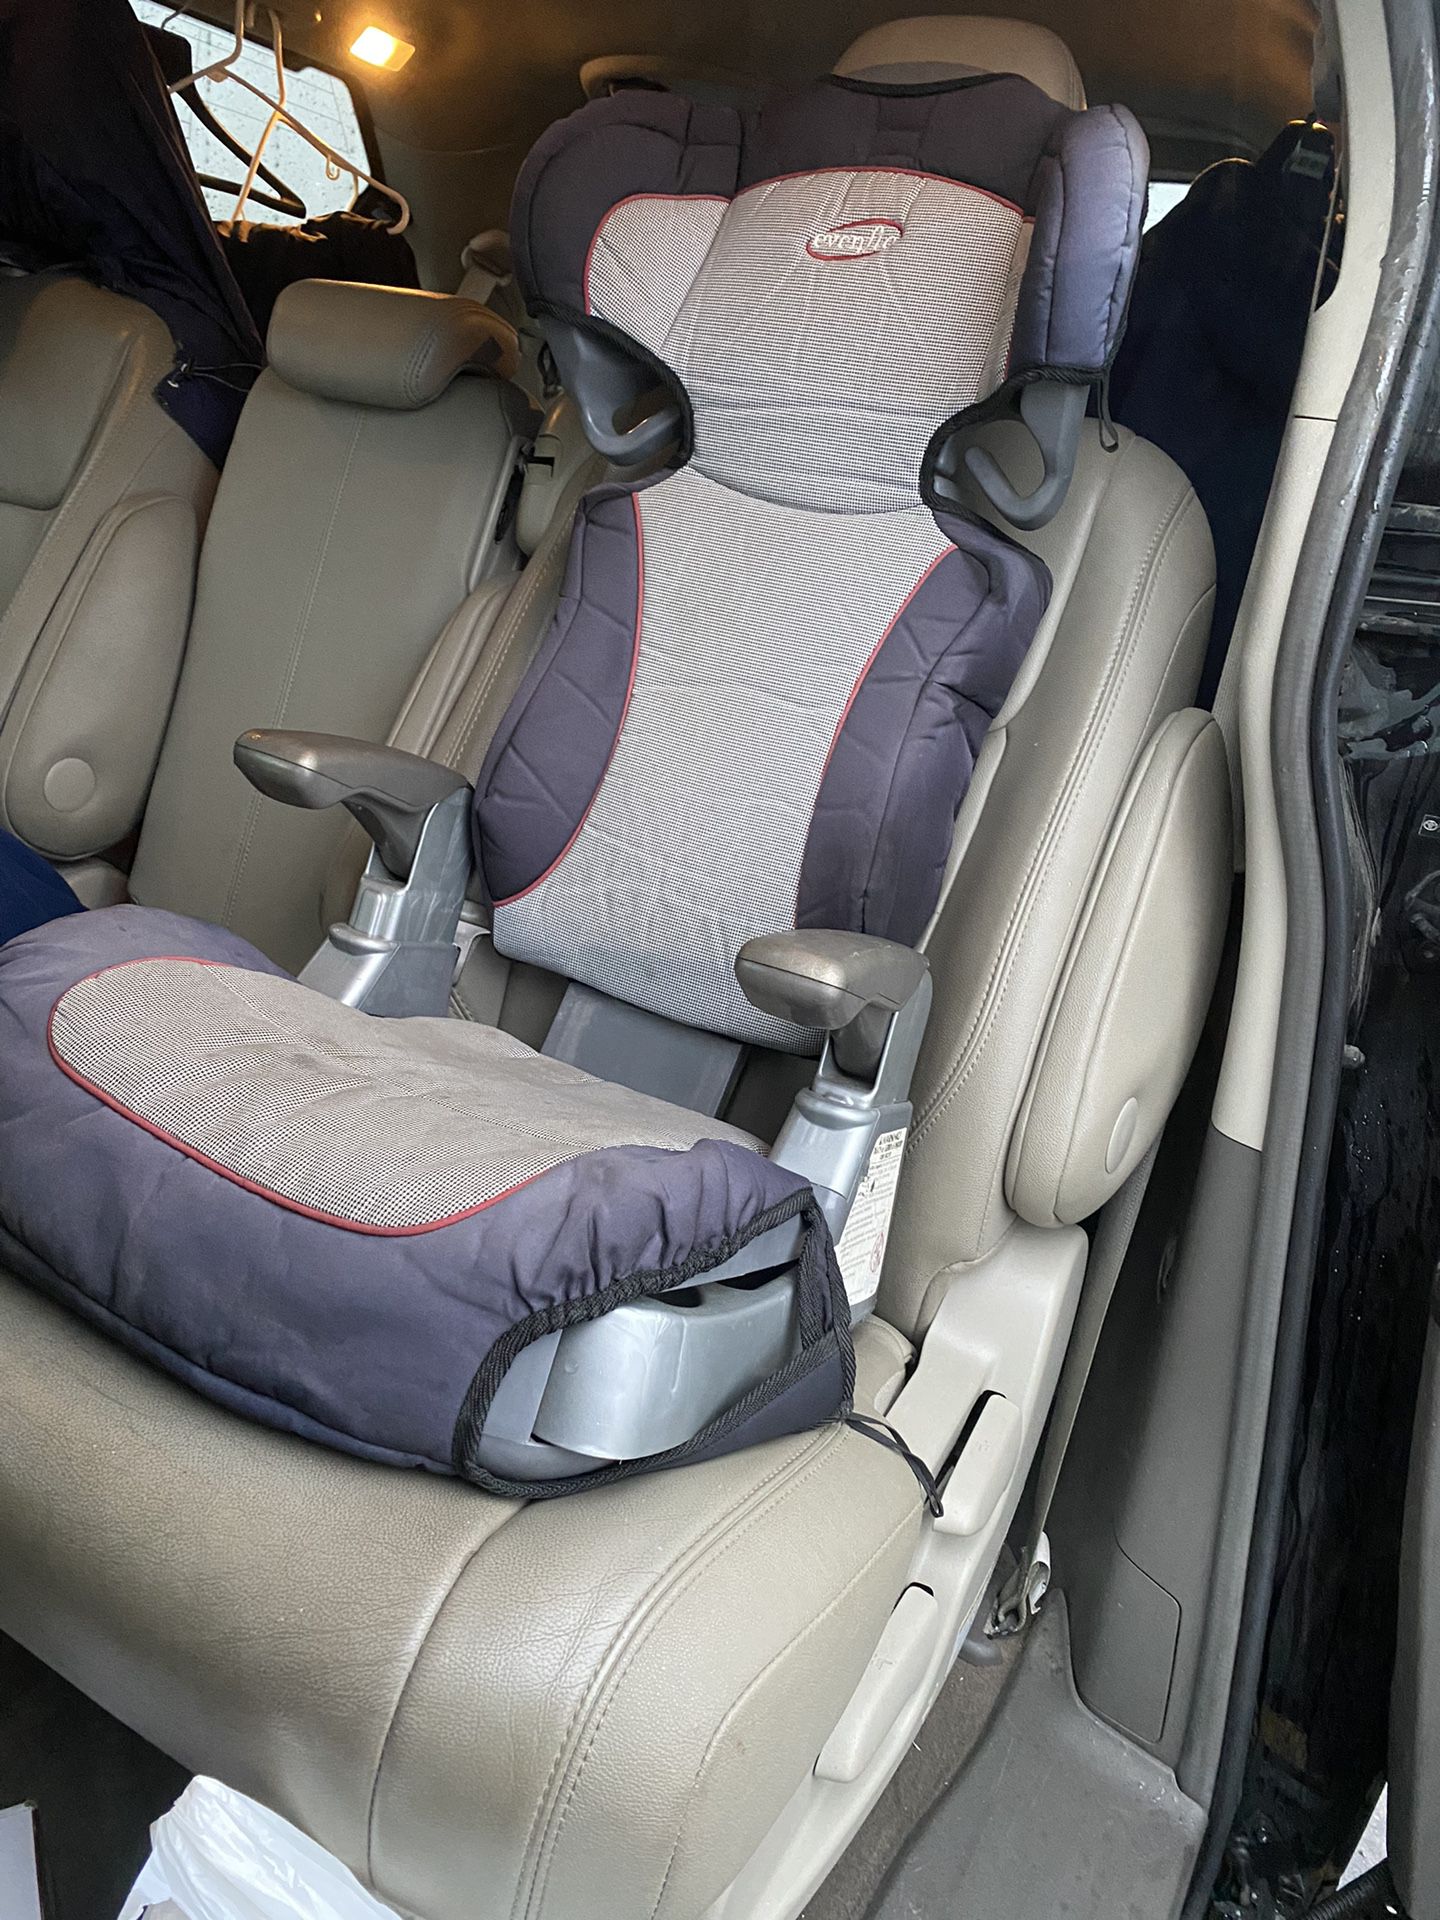 Child car Seat by Evenflo